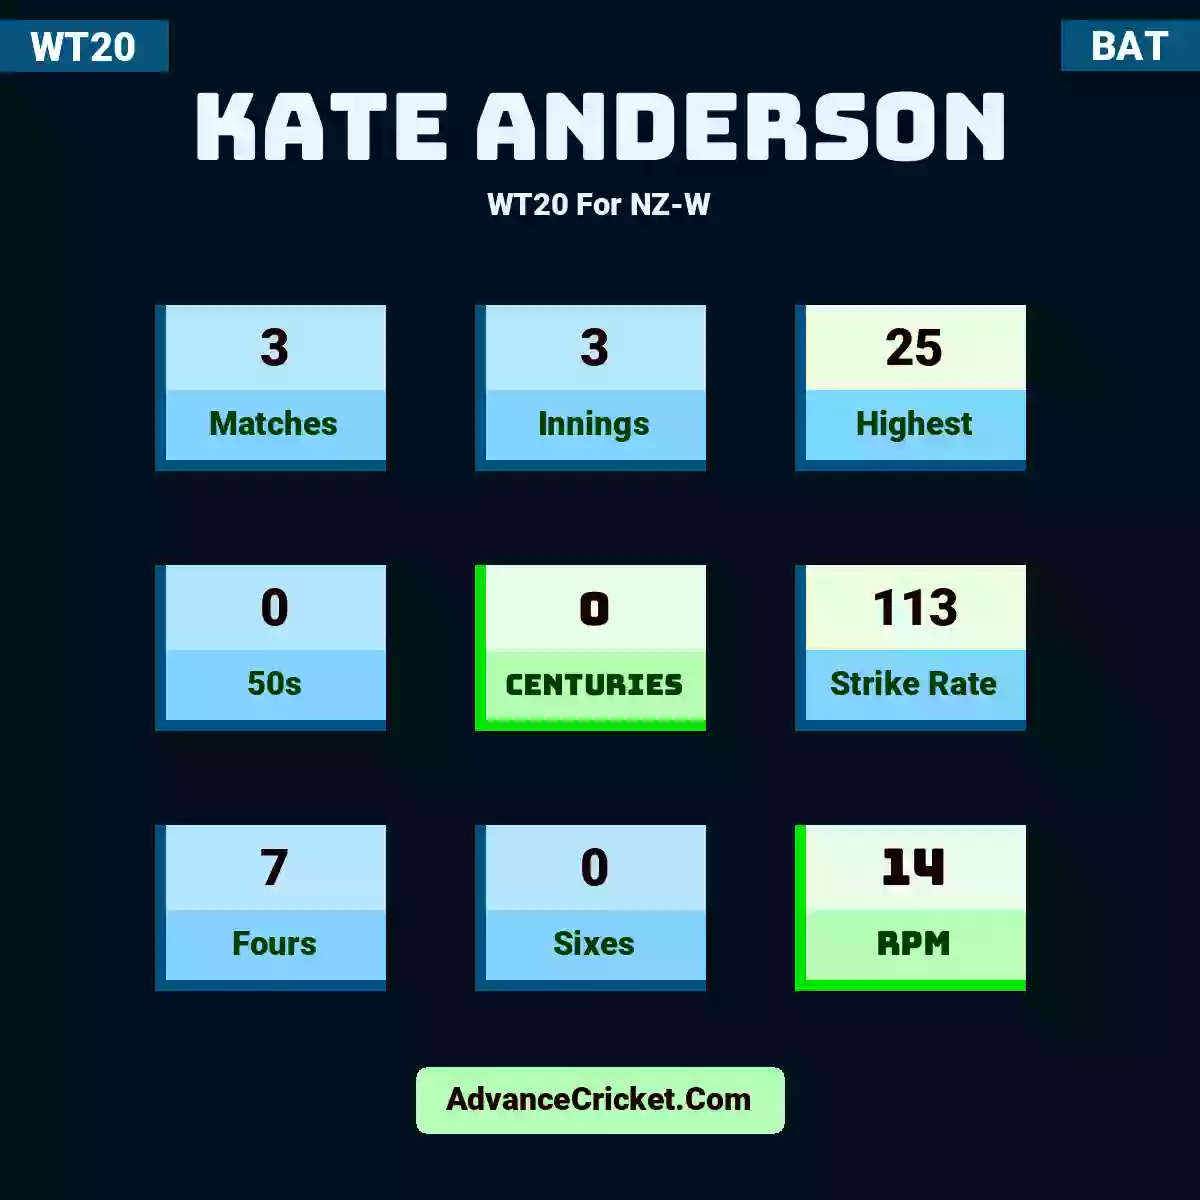 Kate Anderson WT20  For NZ-W, Kate Anderson played 3 matches, scored 25 runs as highest, 0 half-centuries, and 0 centuries, with a strike rate of 113. K.Anderson hit 7 fours and 0 sixes, with an RPM of 14.